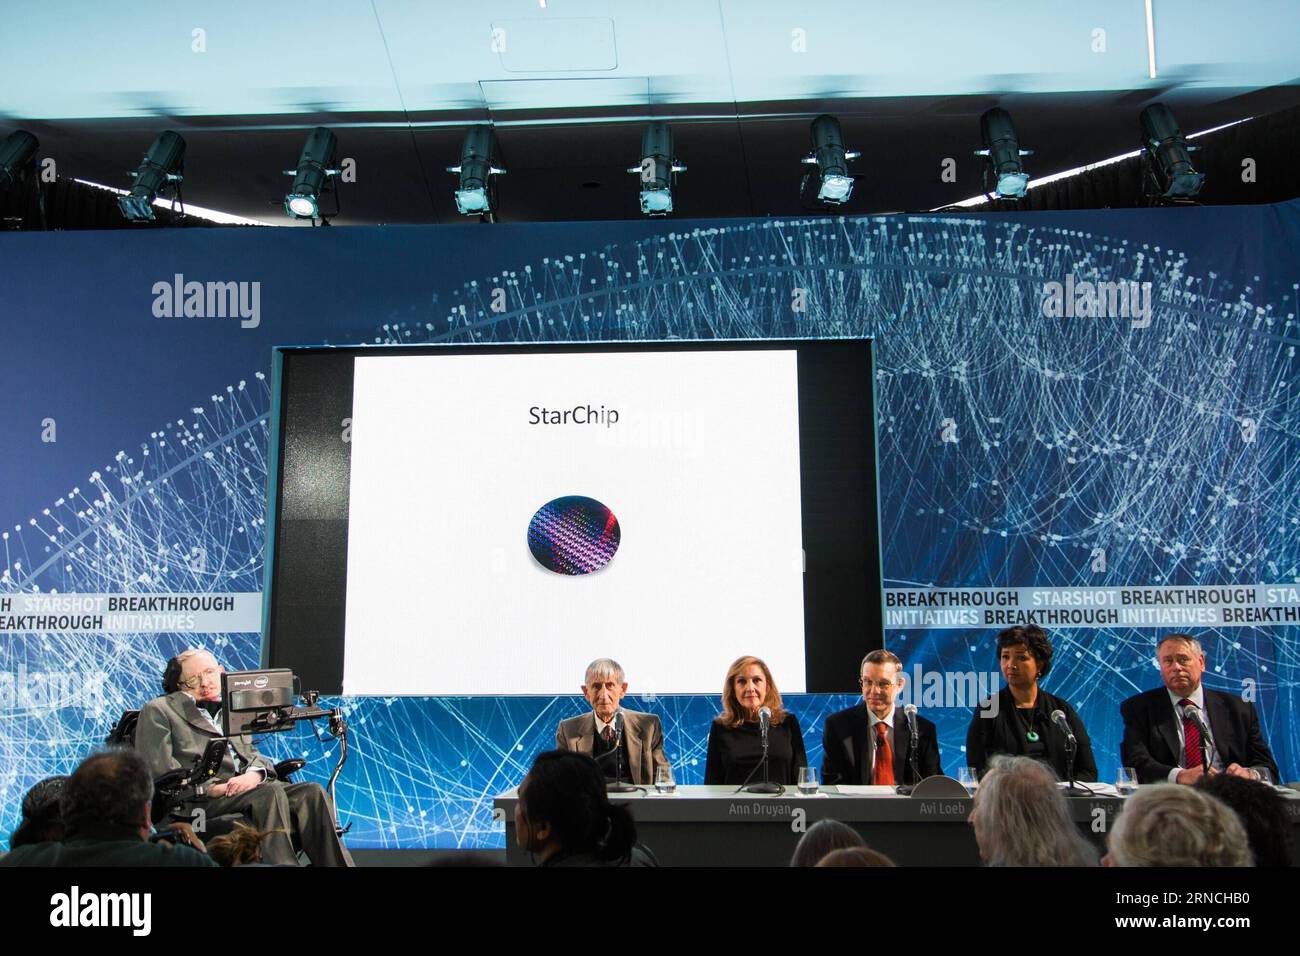 Stephen Hawking präsentiert neues Projekt Breakthrough Starshot 160412 -- NEW YORK, April 12, 2016 -- Photo taken on April 12, 2016 shows the StarShot project press conference at One World Observatory in New York, the United States. Attendees are R to L: former director of NASA s Ames Research Center Pete Worden, NASA astronaut Mae Jemison, theoretical physicist Avi Loeb, author and producer Ann Druyan, theoretical physicist and mathematician Freeman Dyson and astrophysicist Stephen Hawking. British astrophysicist Stephen Hawking announced here Tuesday he is teaming up with Russian billionaire Stock Photo